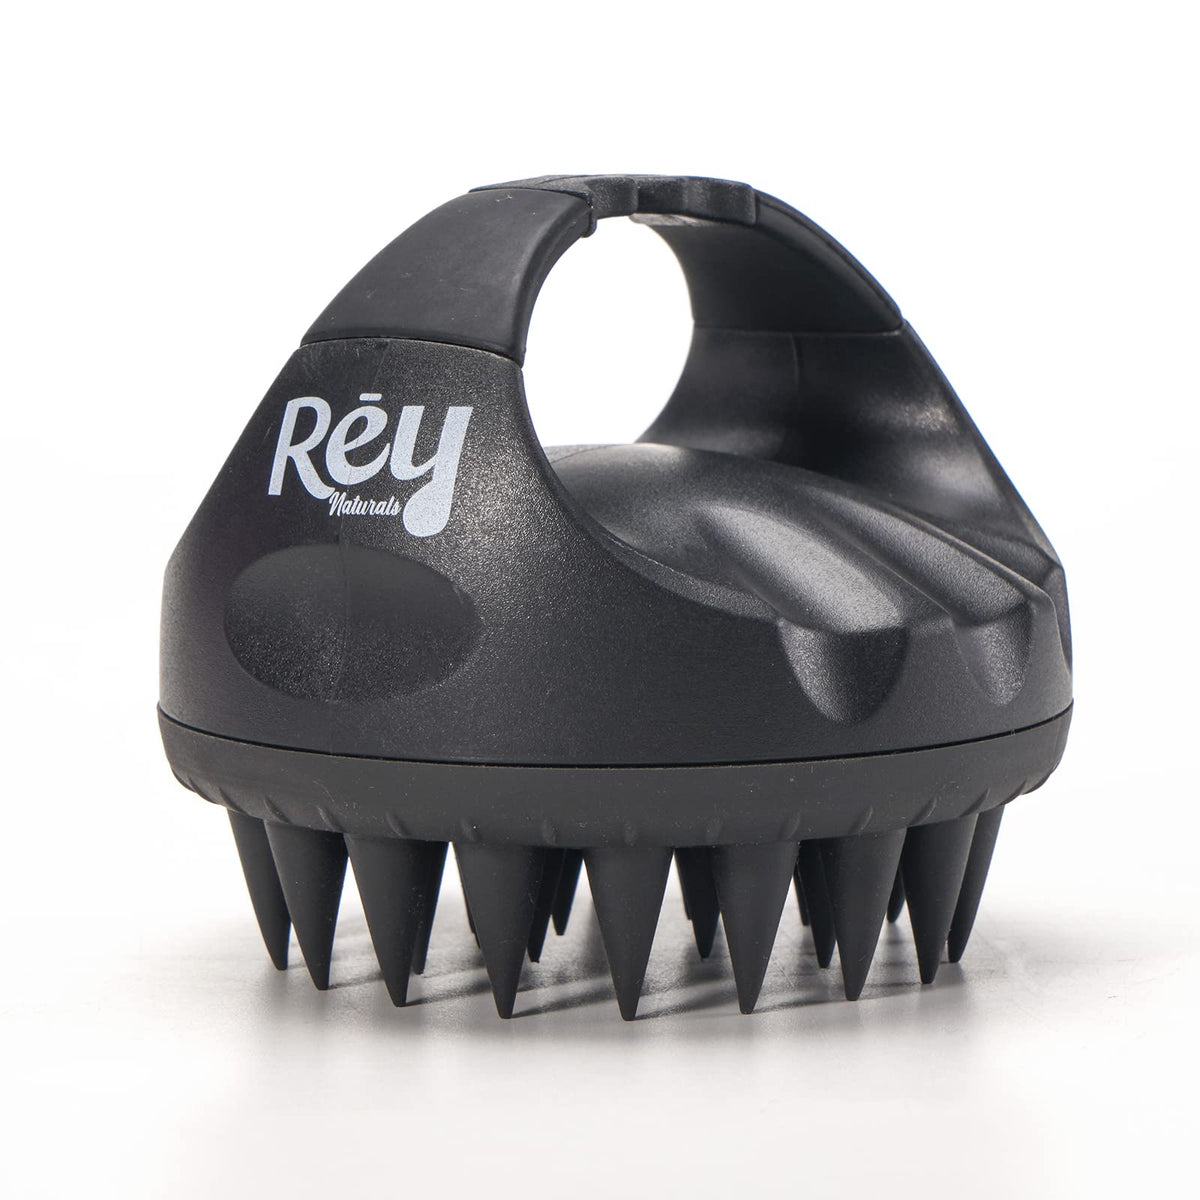 Rey Naturals Hair Scalp Massager Shampoo Brush - Hair Growth, Scalp Care, and Relaxation - Soft Bristles for Gentle Massage - Black Color